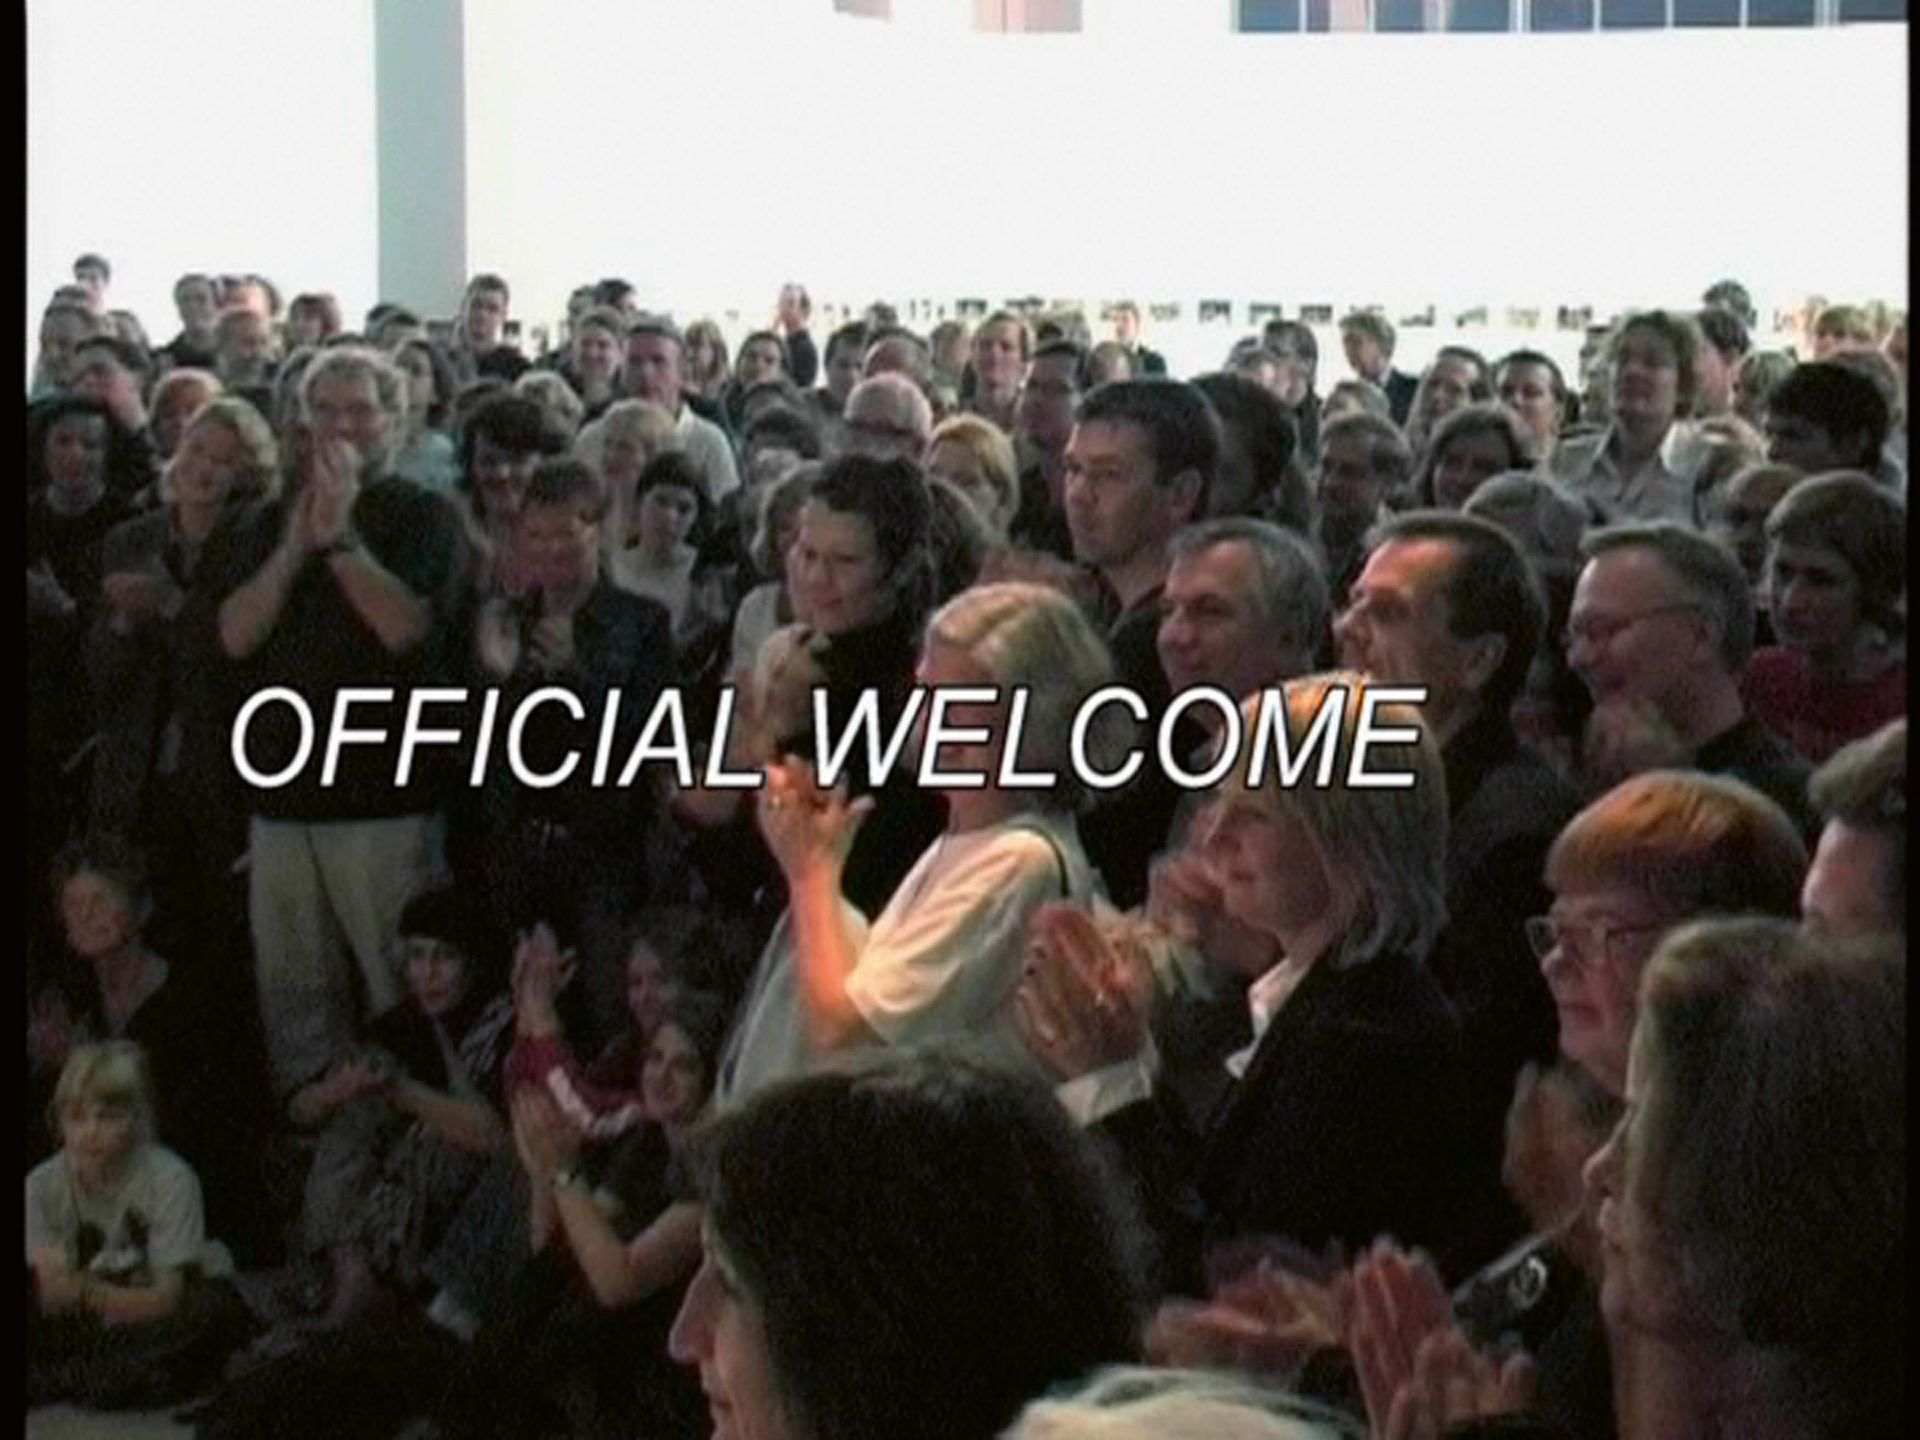 Andrea Fraser: Official Welcome - Image 2 of 7